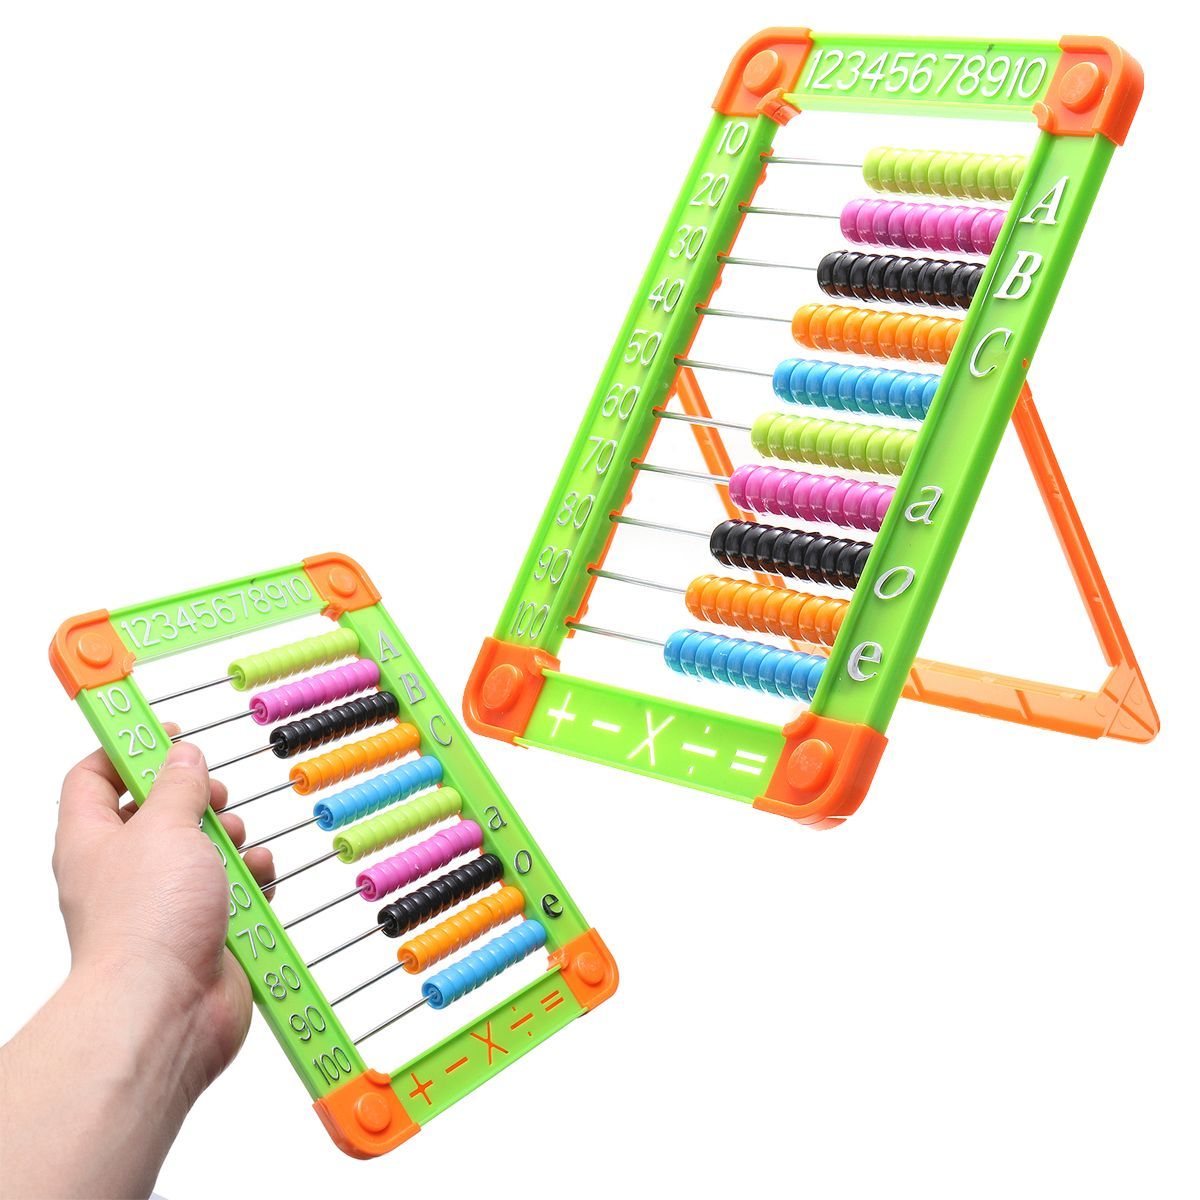 100-Beads-Abacus-Counting-Number-Preschool-Kid-Math-Learning-Teaching-Education-Calculator-Toys-1515708